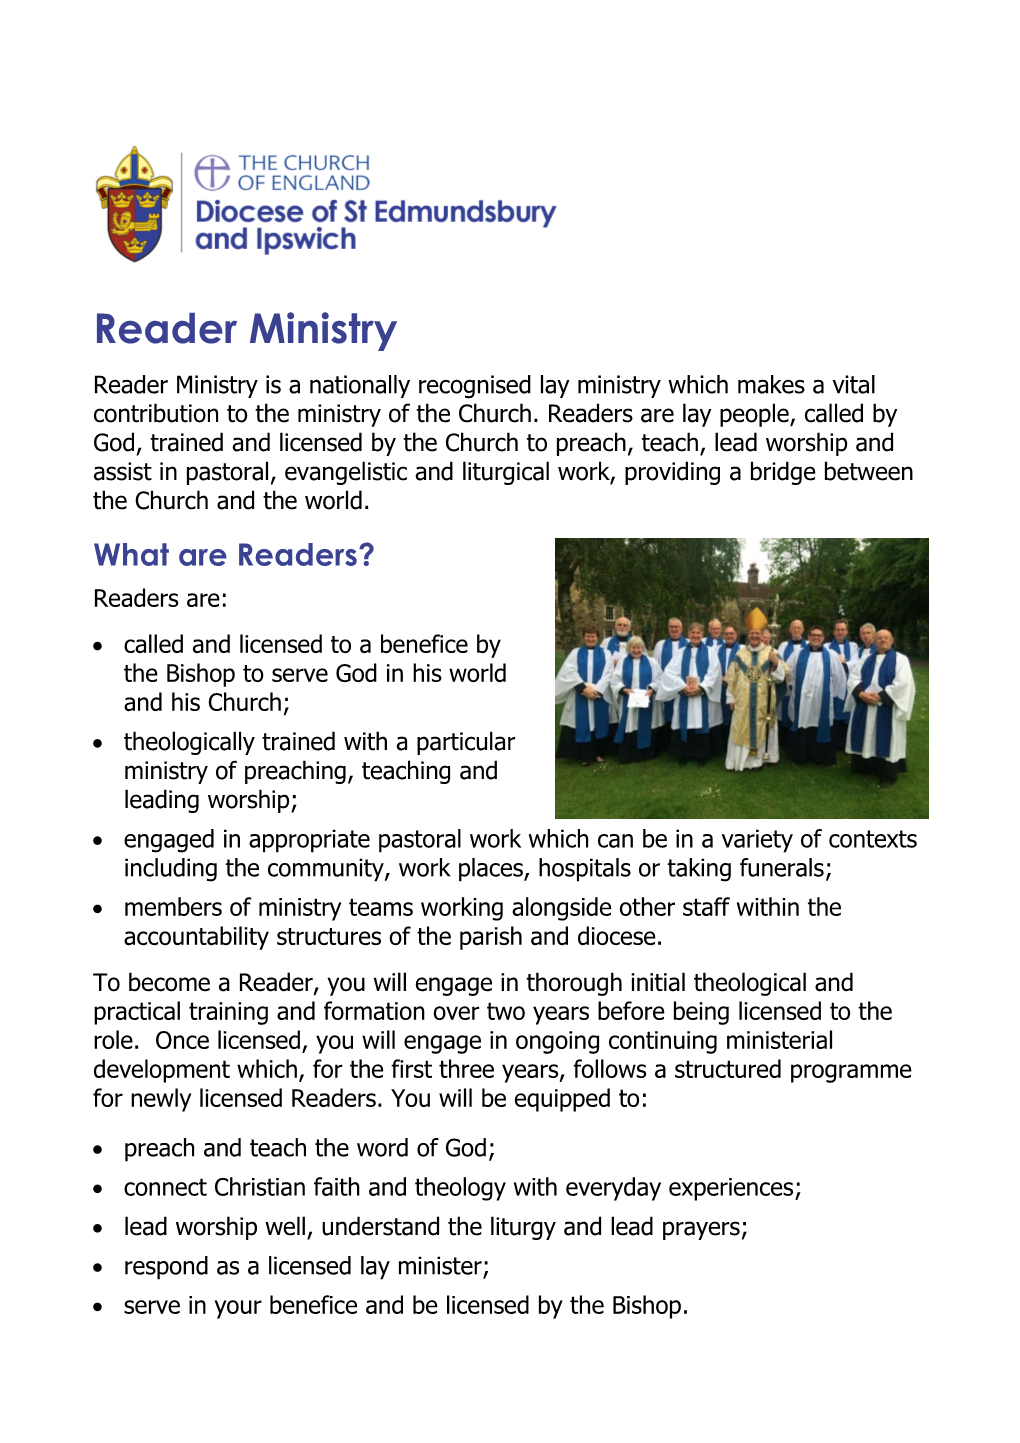 Reader Ministry Reader Ministry Is a Nationally Recognised Lay Ministry Which Makes a Vital Contribution to the Ministry of the Church